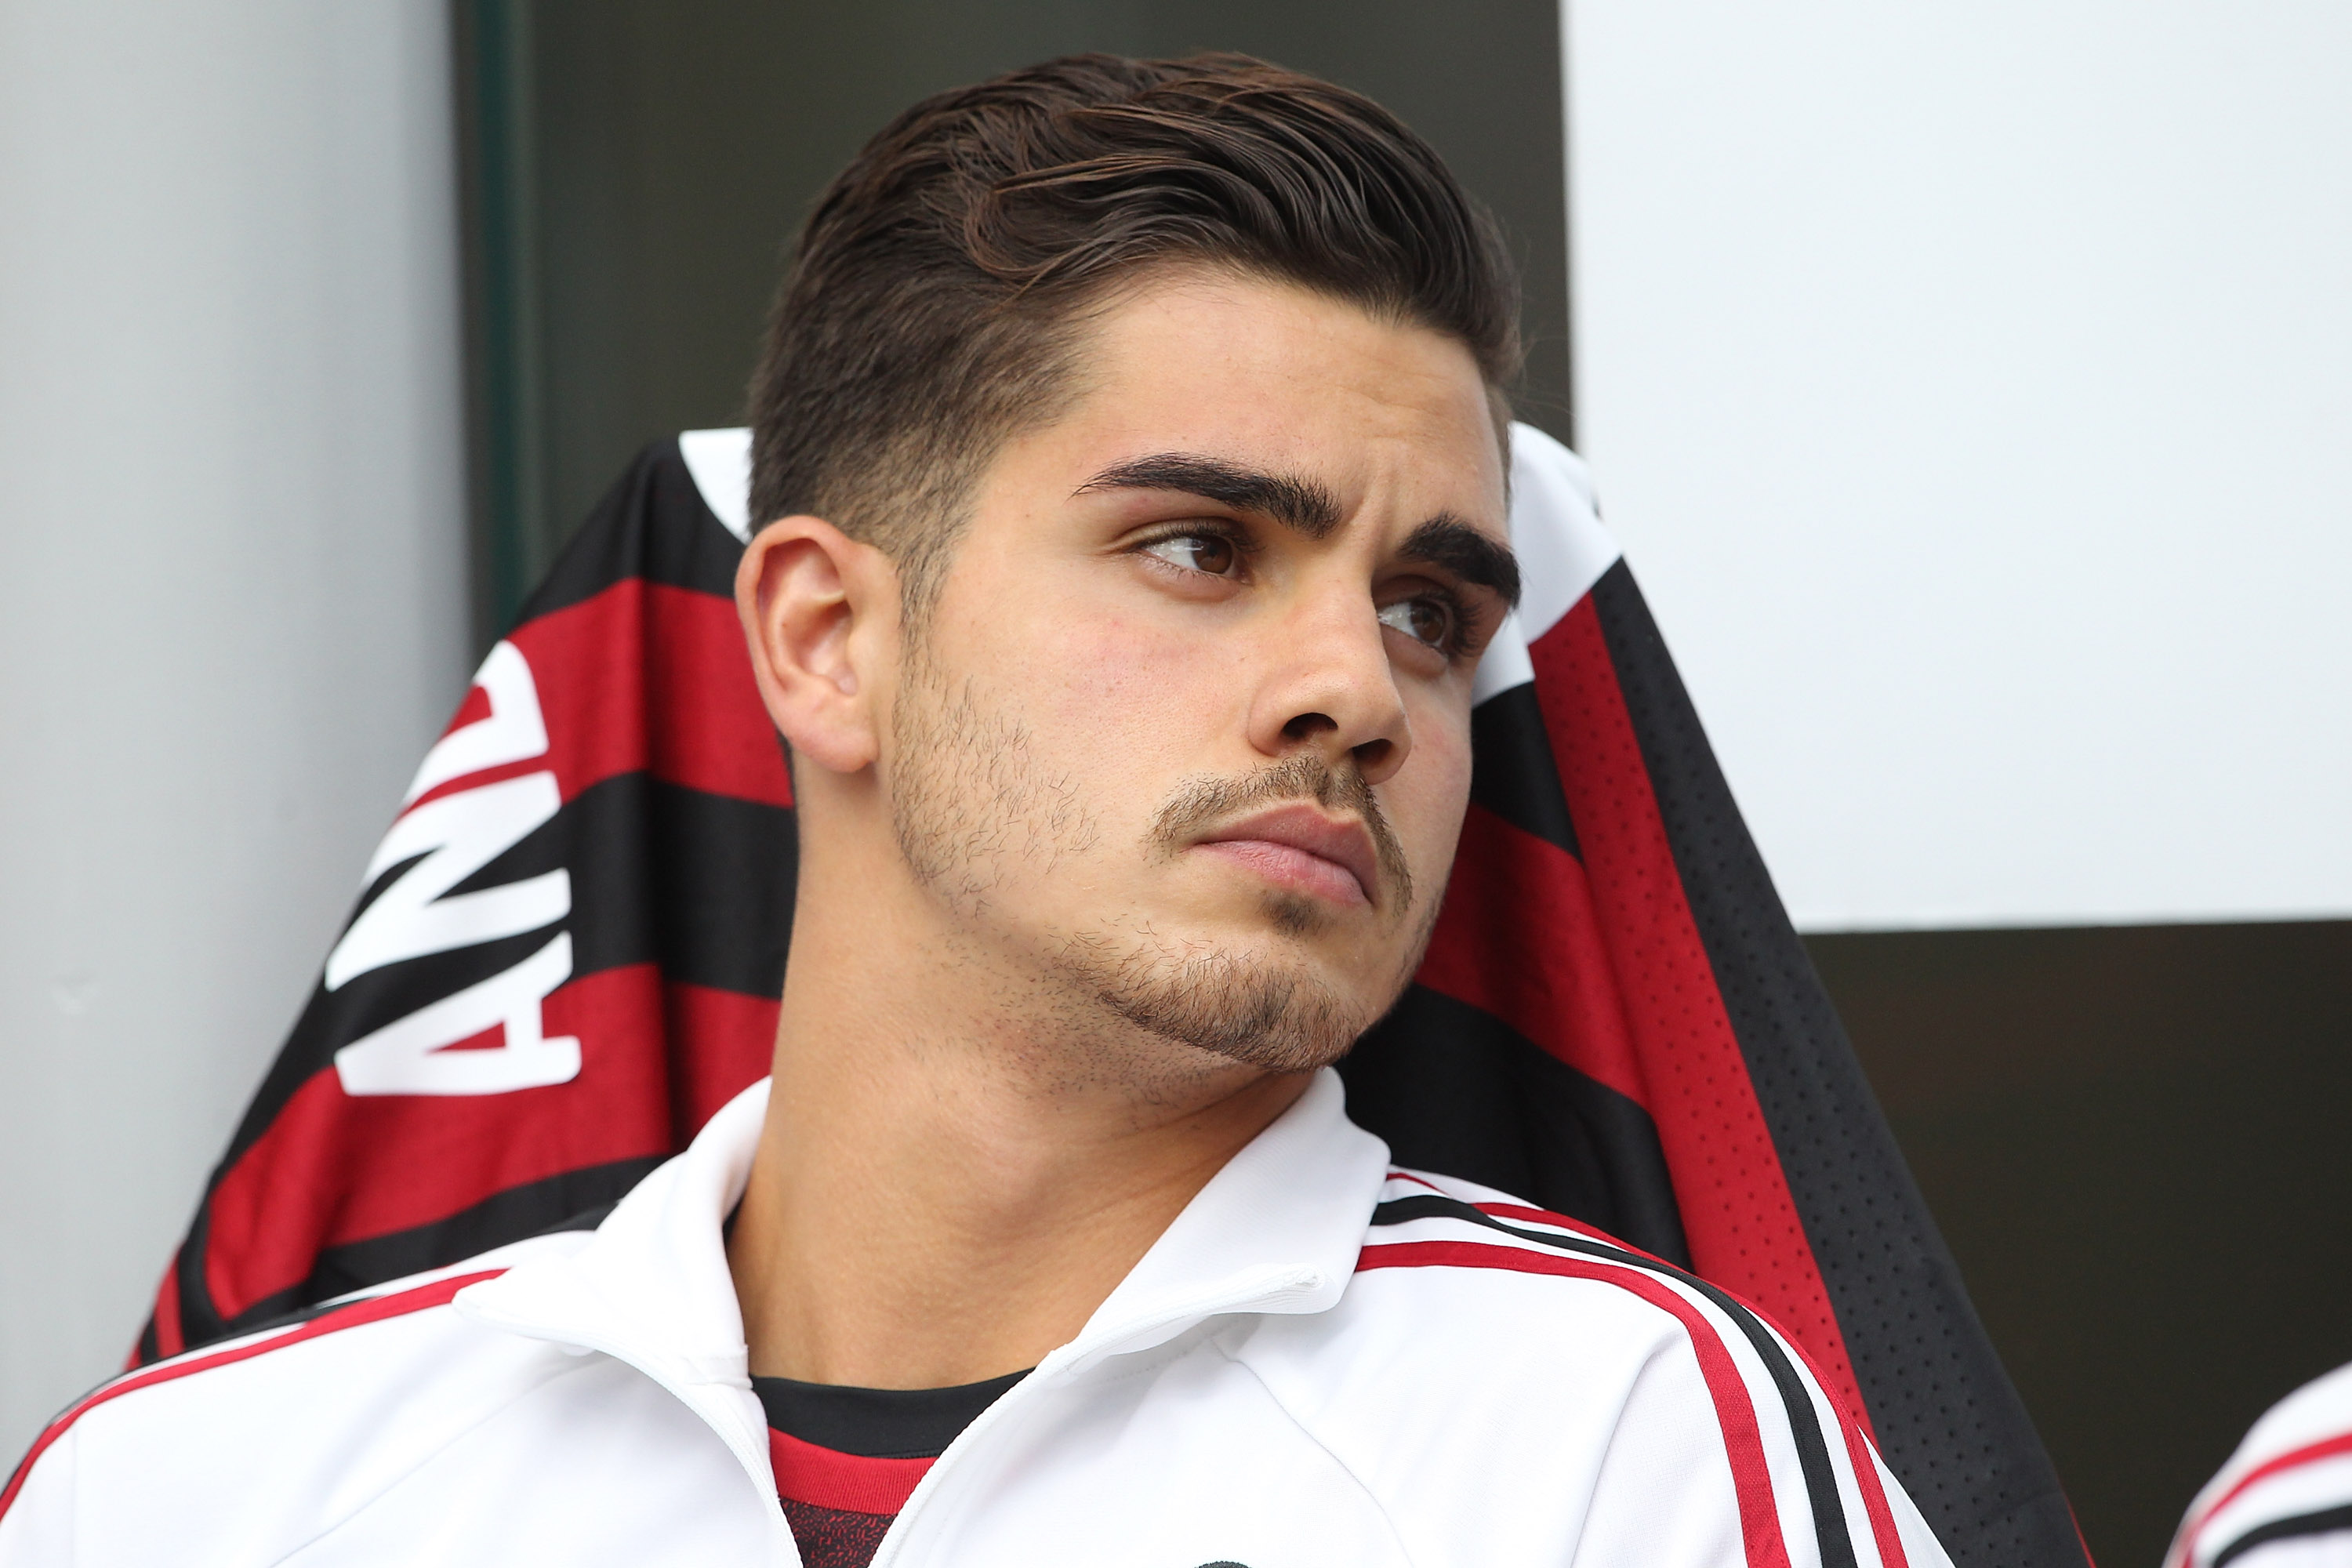 MILAN, ITALY - OCTOBER 22:  Andre Silva of AC Milan looks on before the Serie A match between AC Milan and Genoa CFC at Stadio Giuseppe Meazza on October 22, 2017 in Milan, Italy.  (Photo by Marco Luzzani/Getty Images)